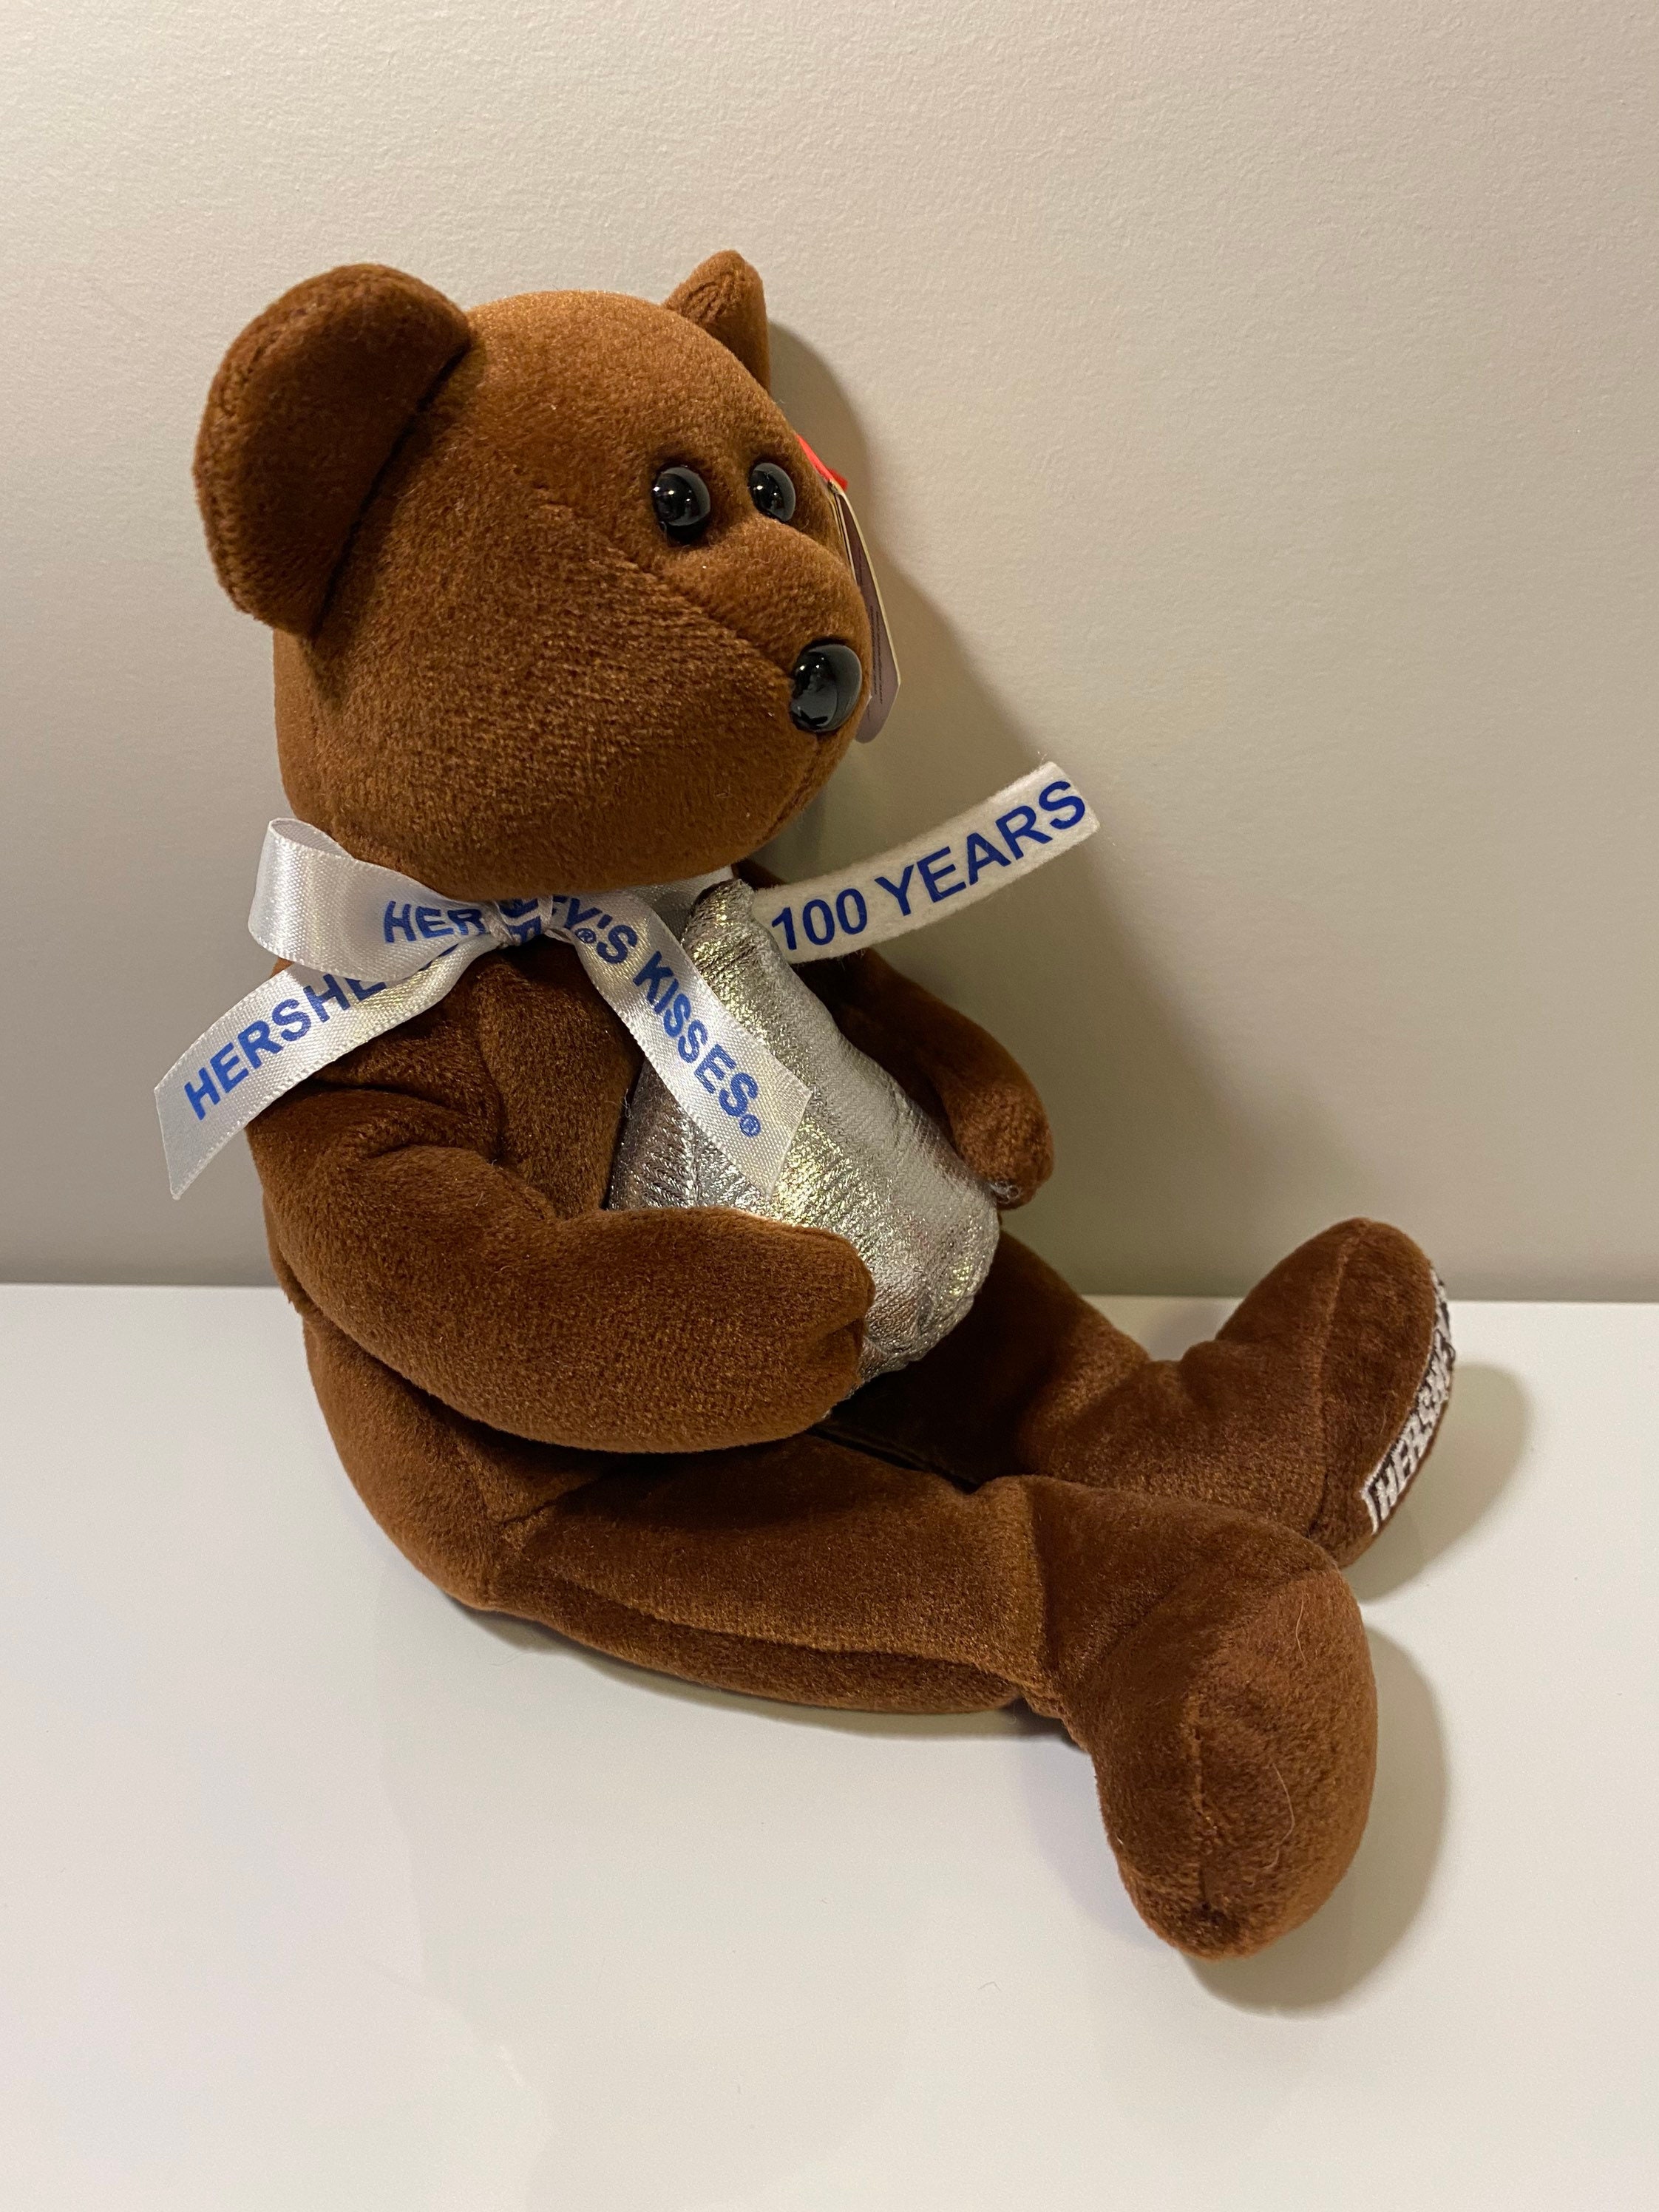 TY Beanie Baby 8.5 inch -MWMTs Walgreen's Excl COCOA BEAN the Hershey Bear 